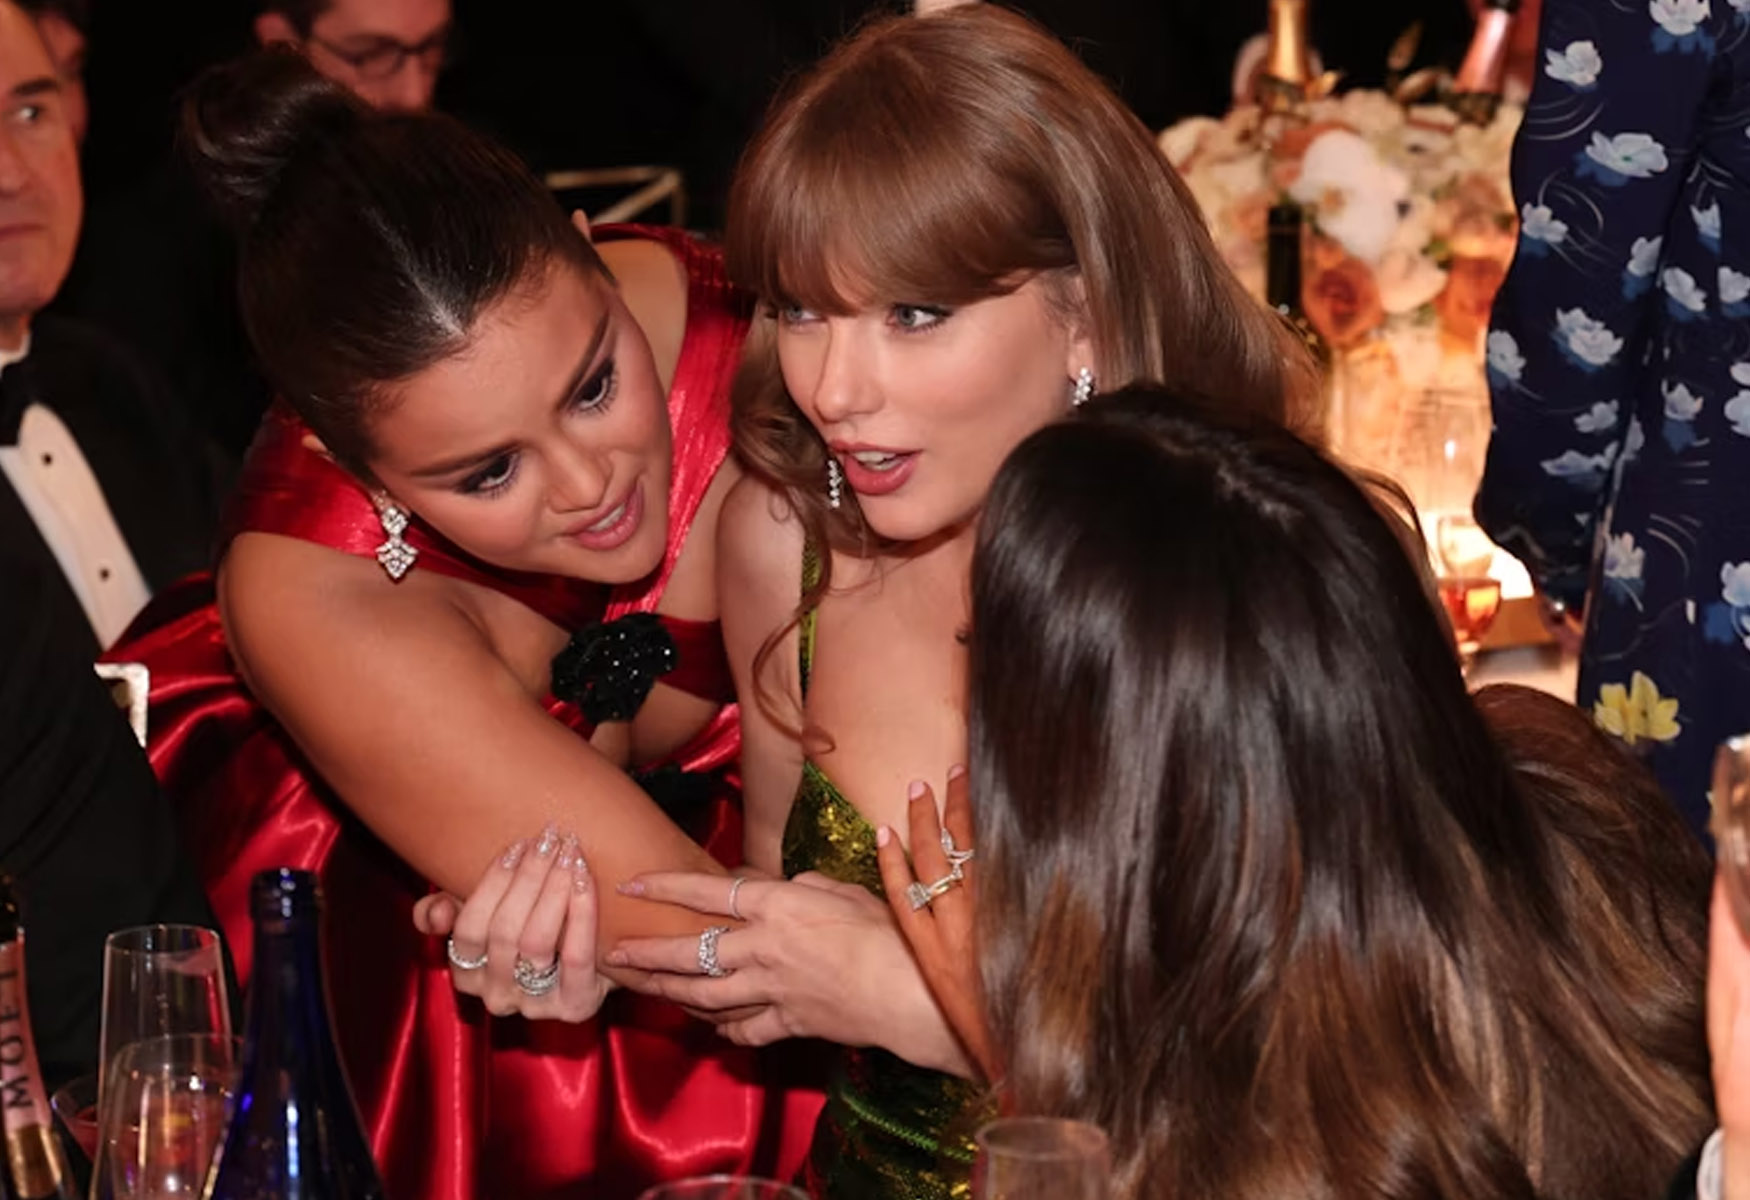 selena-gomezs-whispers-to-taylor-swift-at-golden-globes-spark-speculation